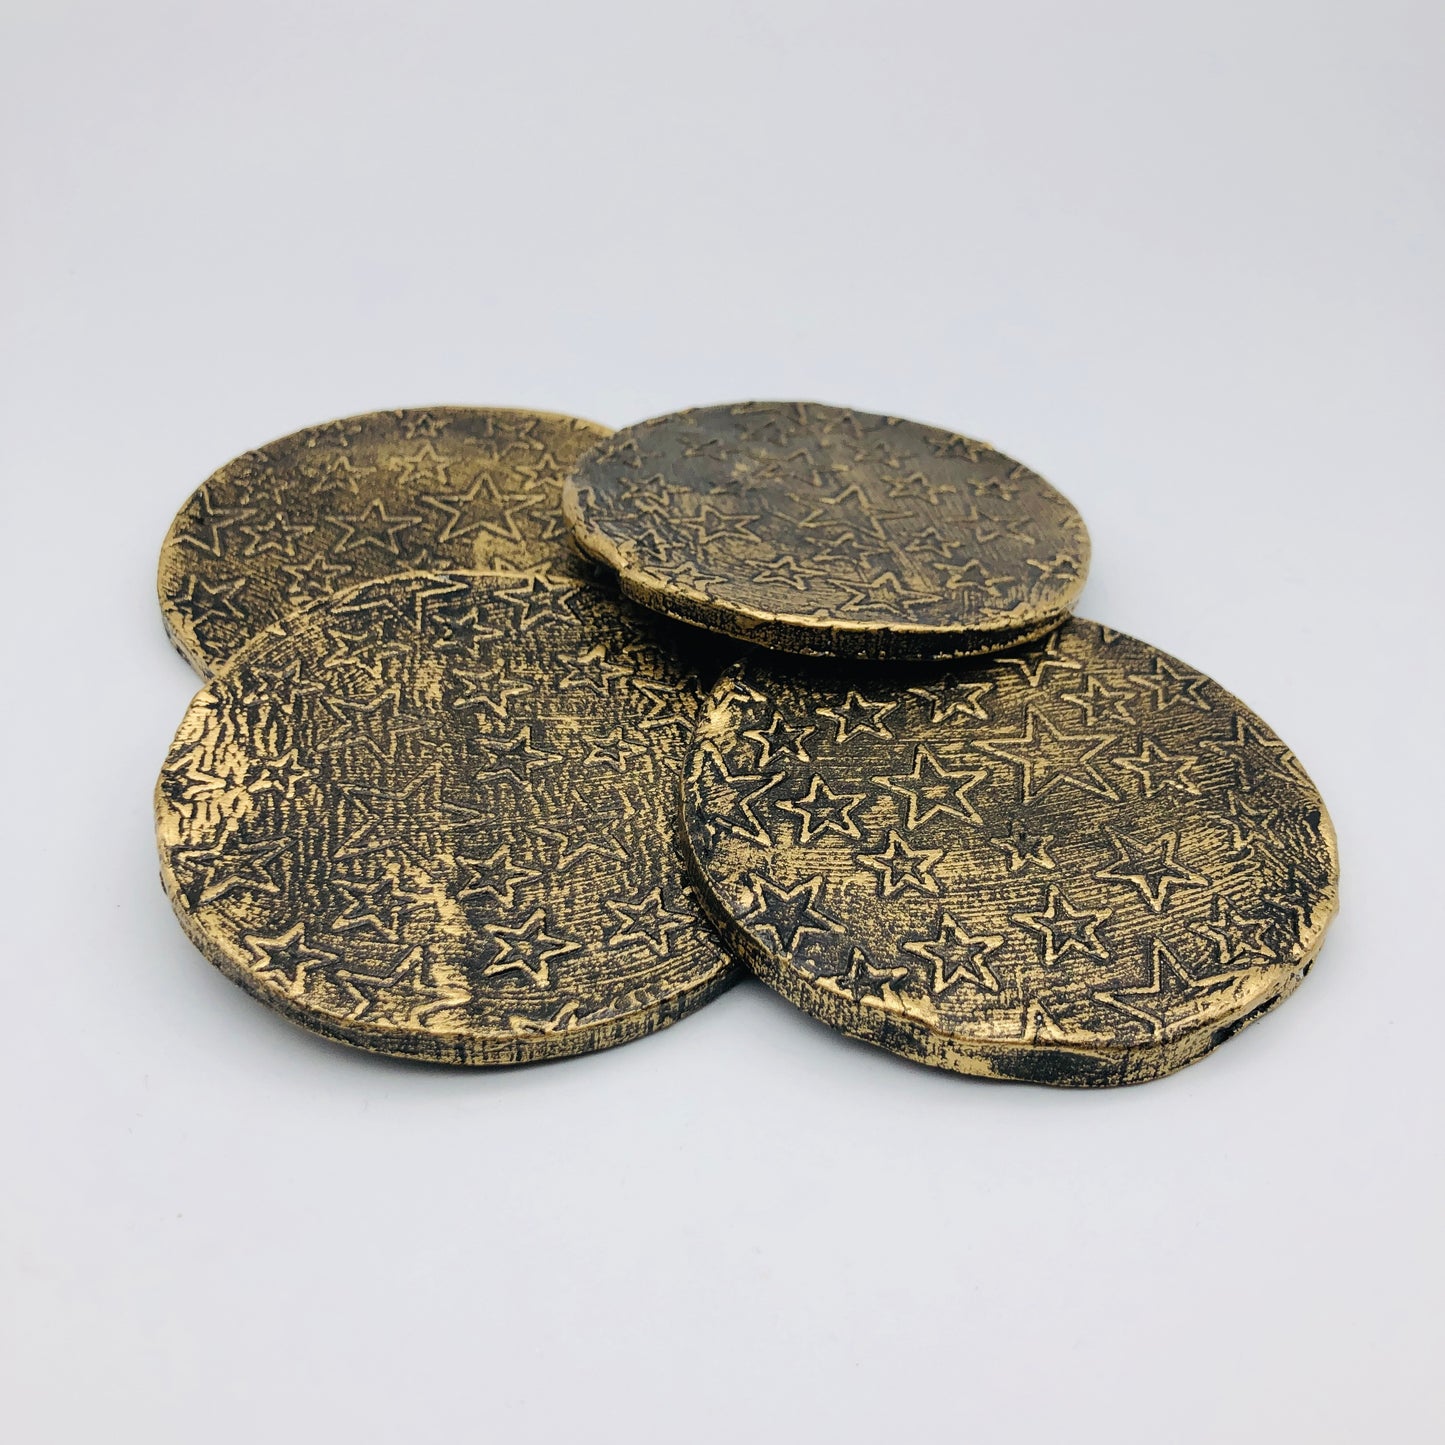 Hand Made Clay Coasters & Worktop Savers - Unique Luxury-The perfect GIFT 🎁